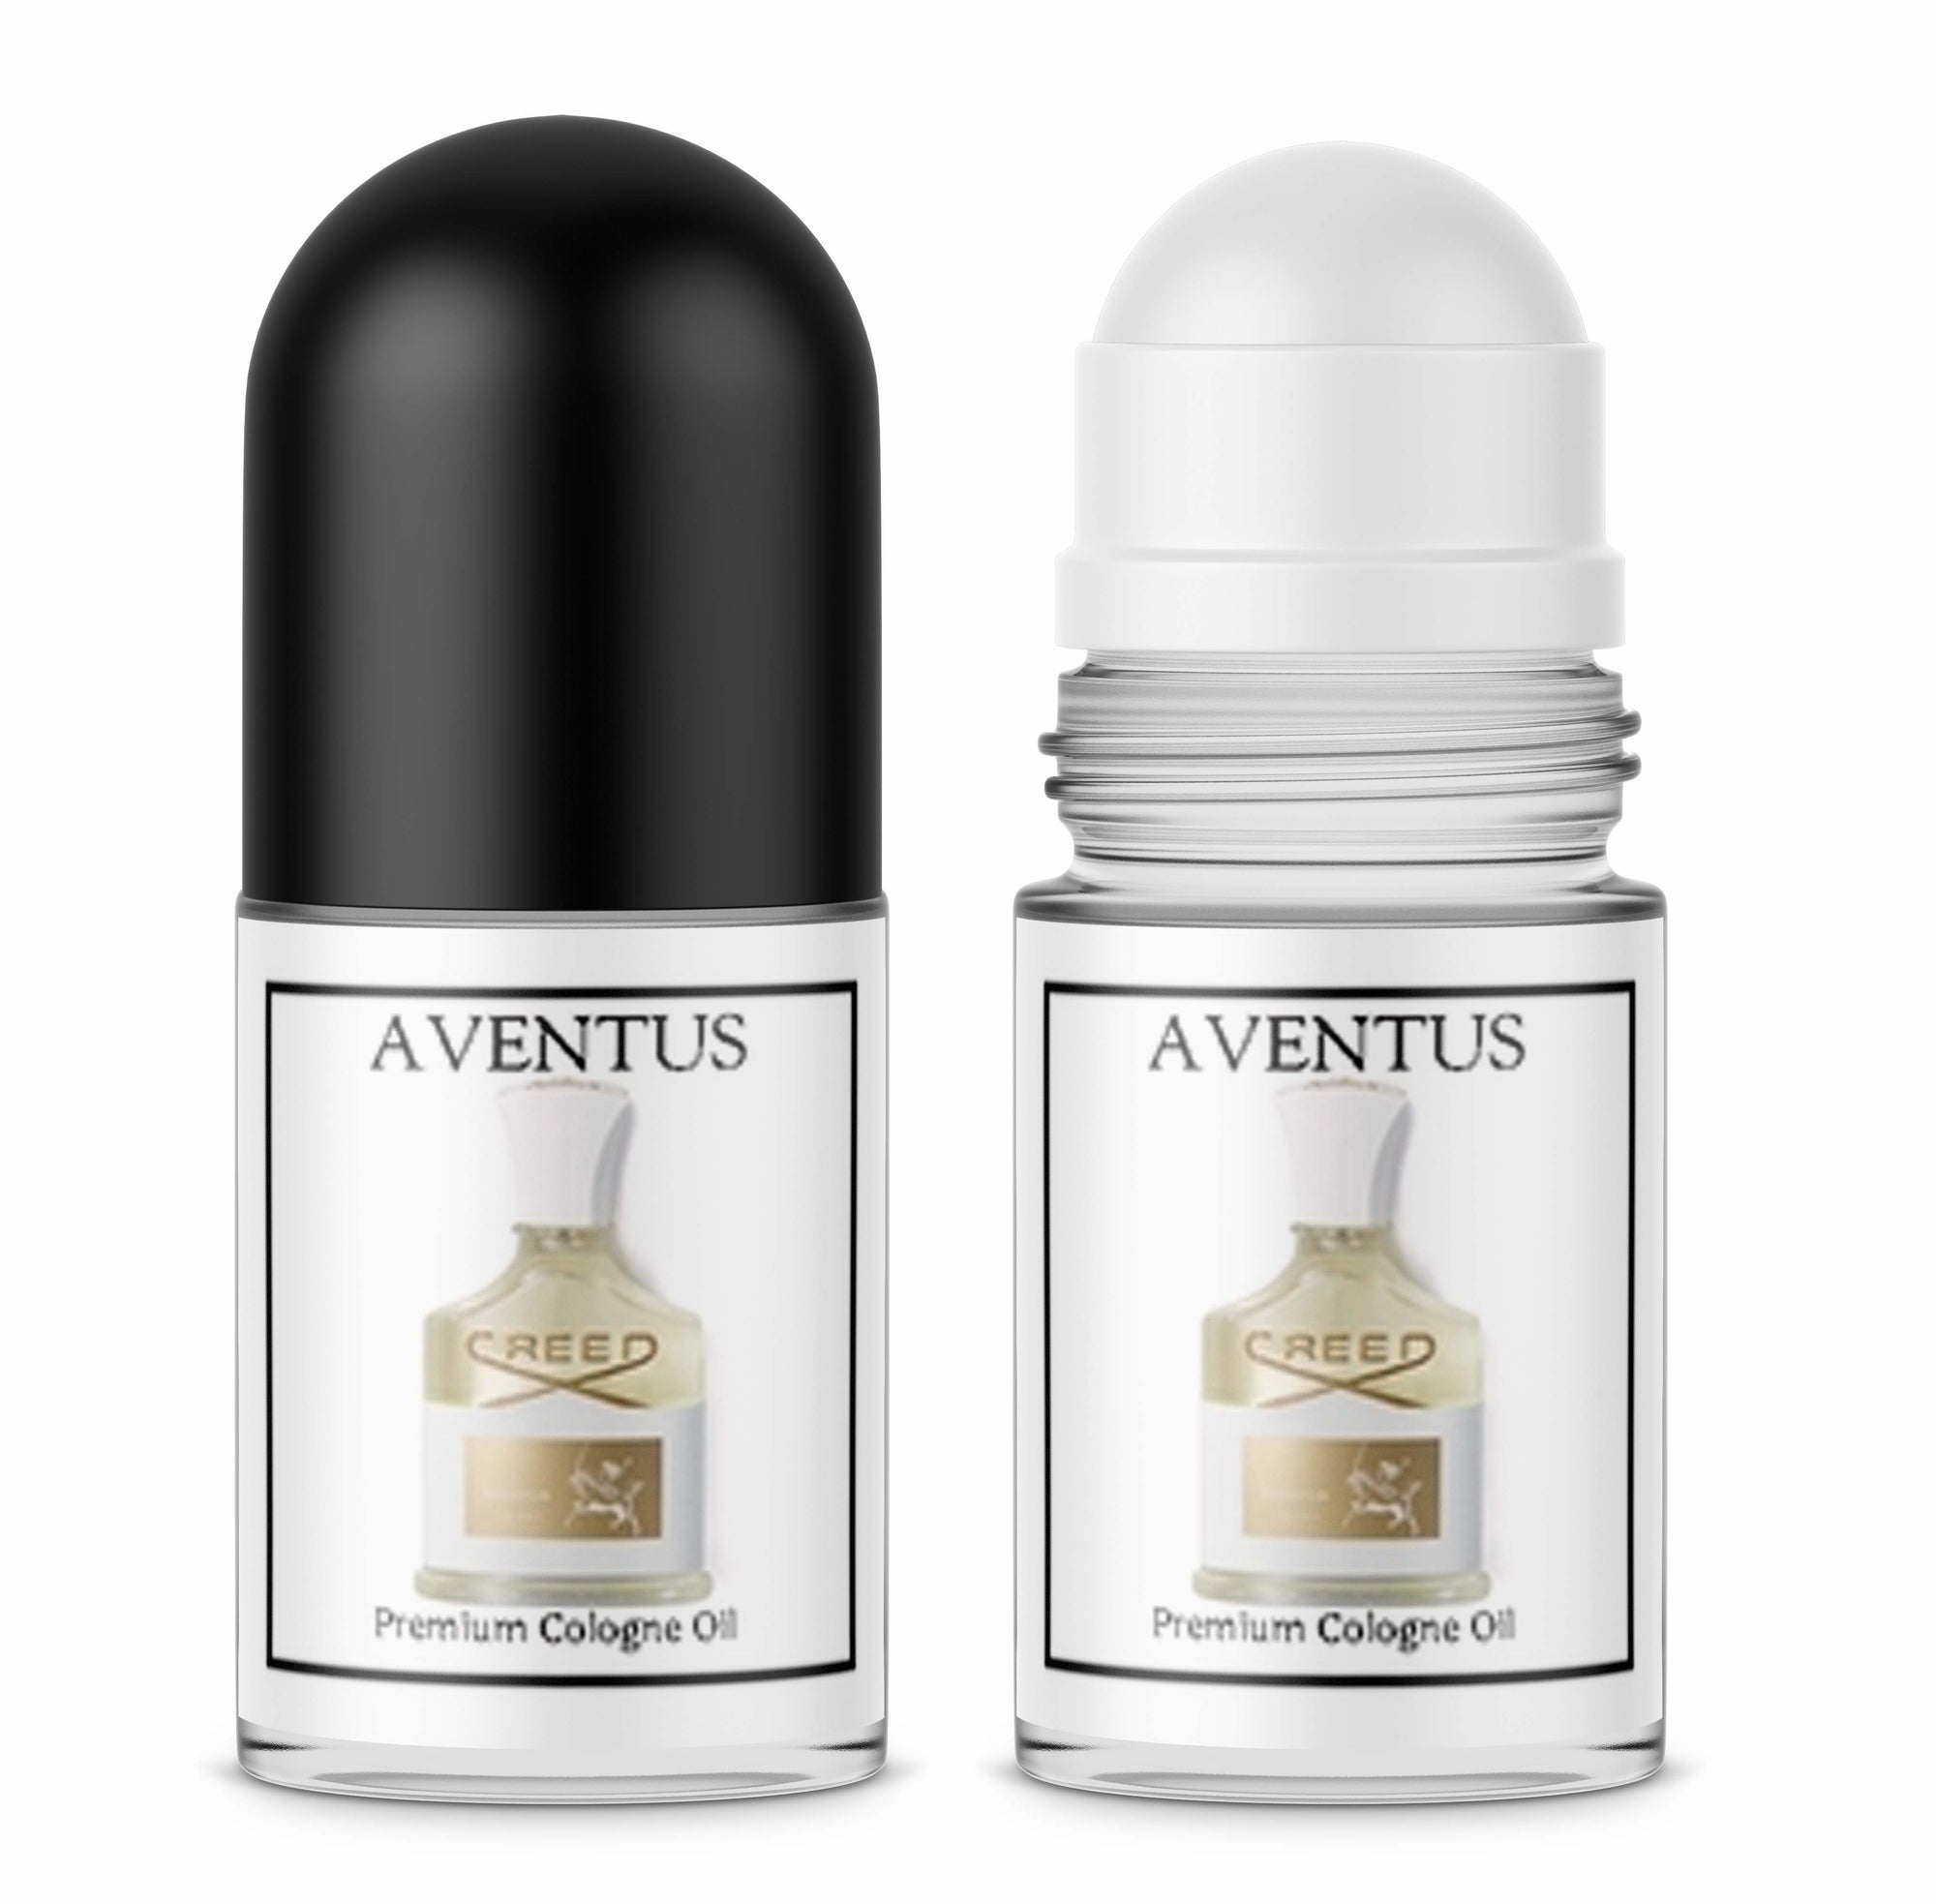 Aventus Creed Roll On Cologne Oil - Women